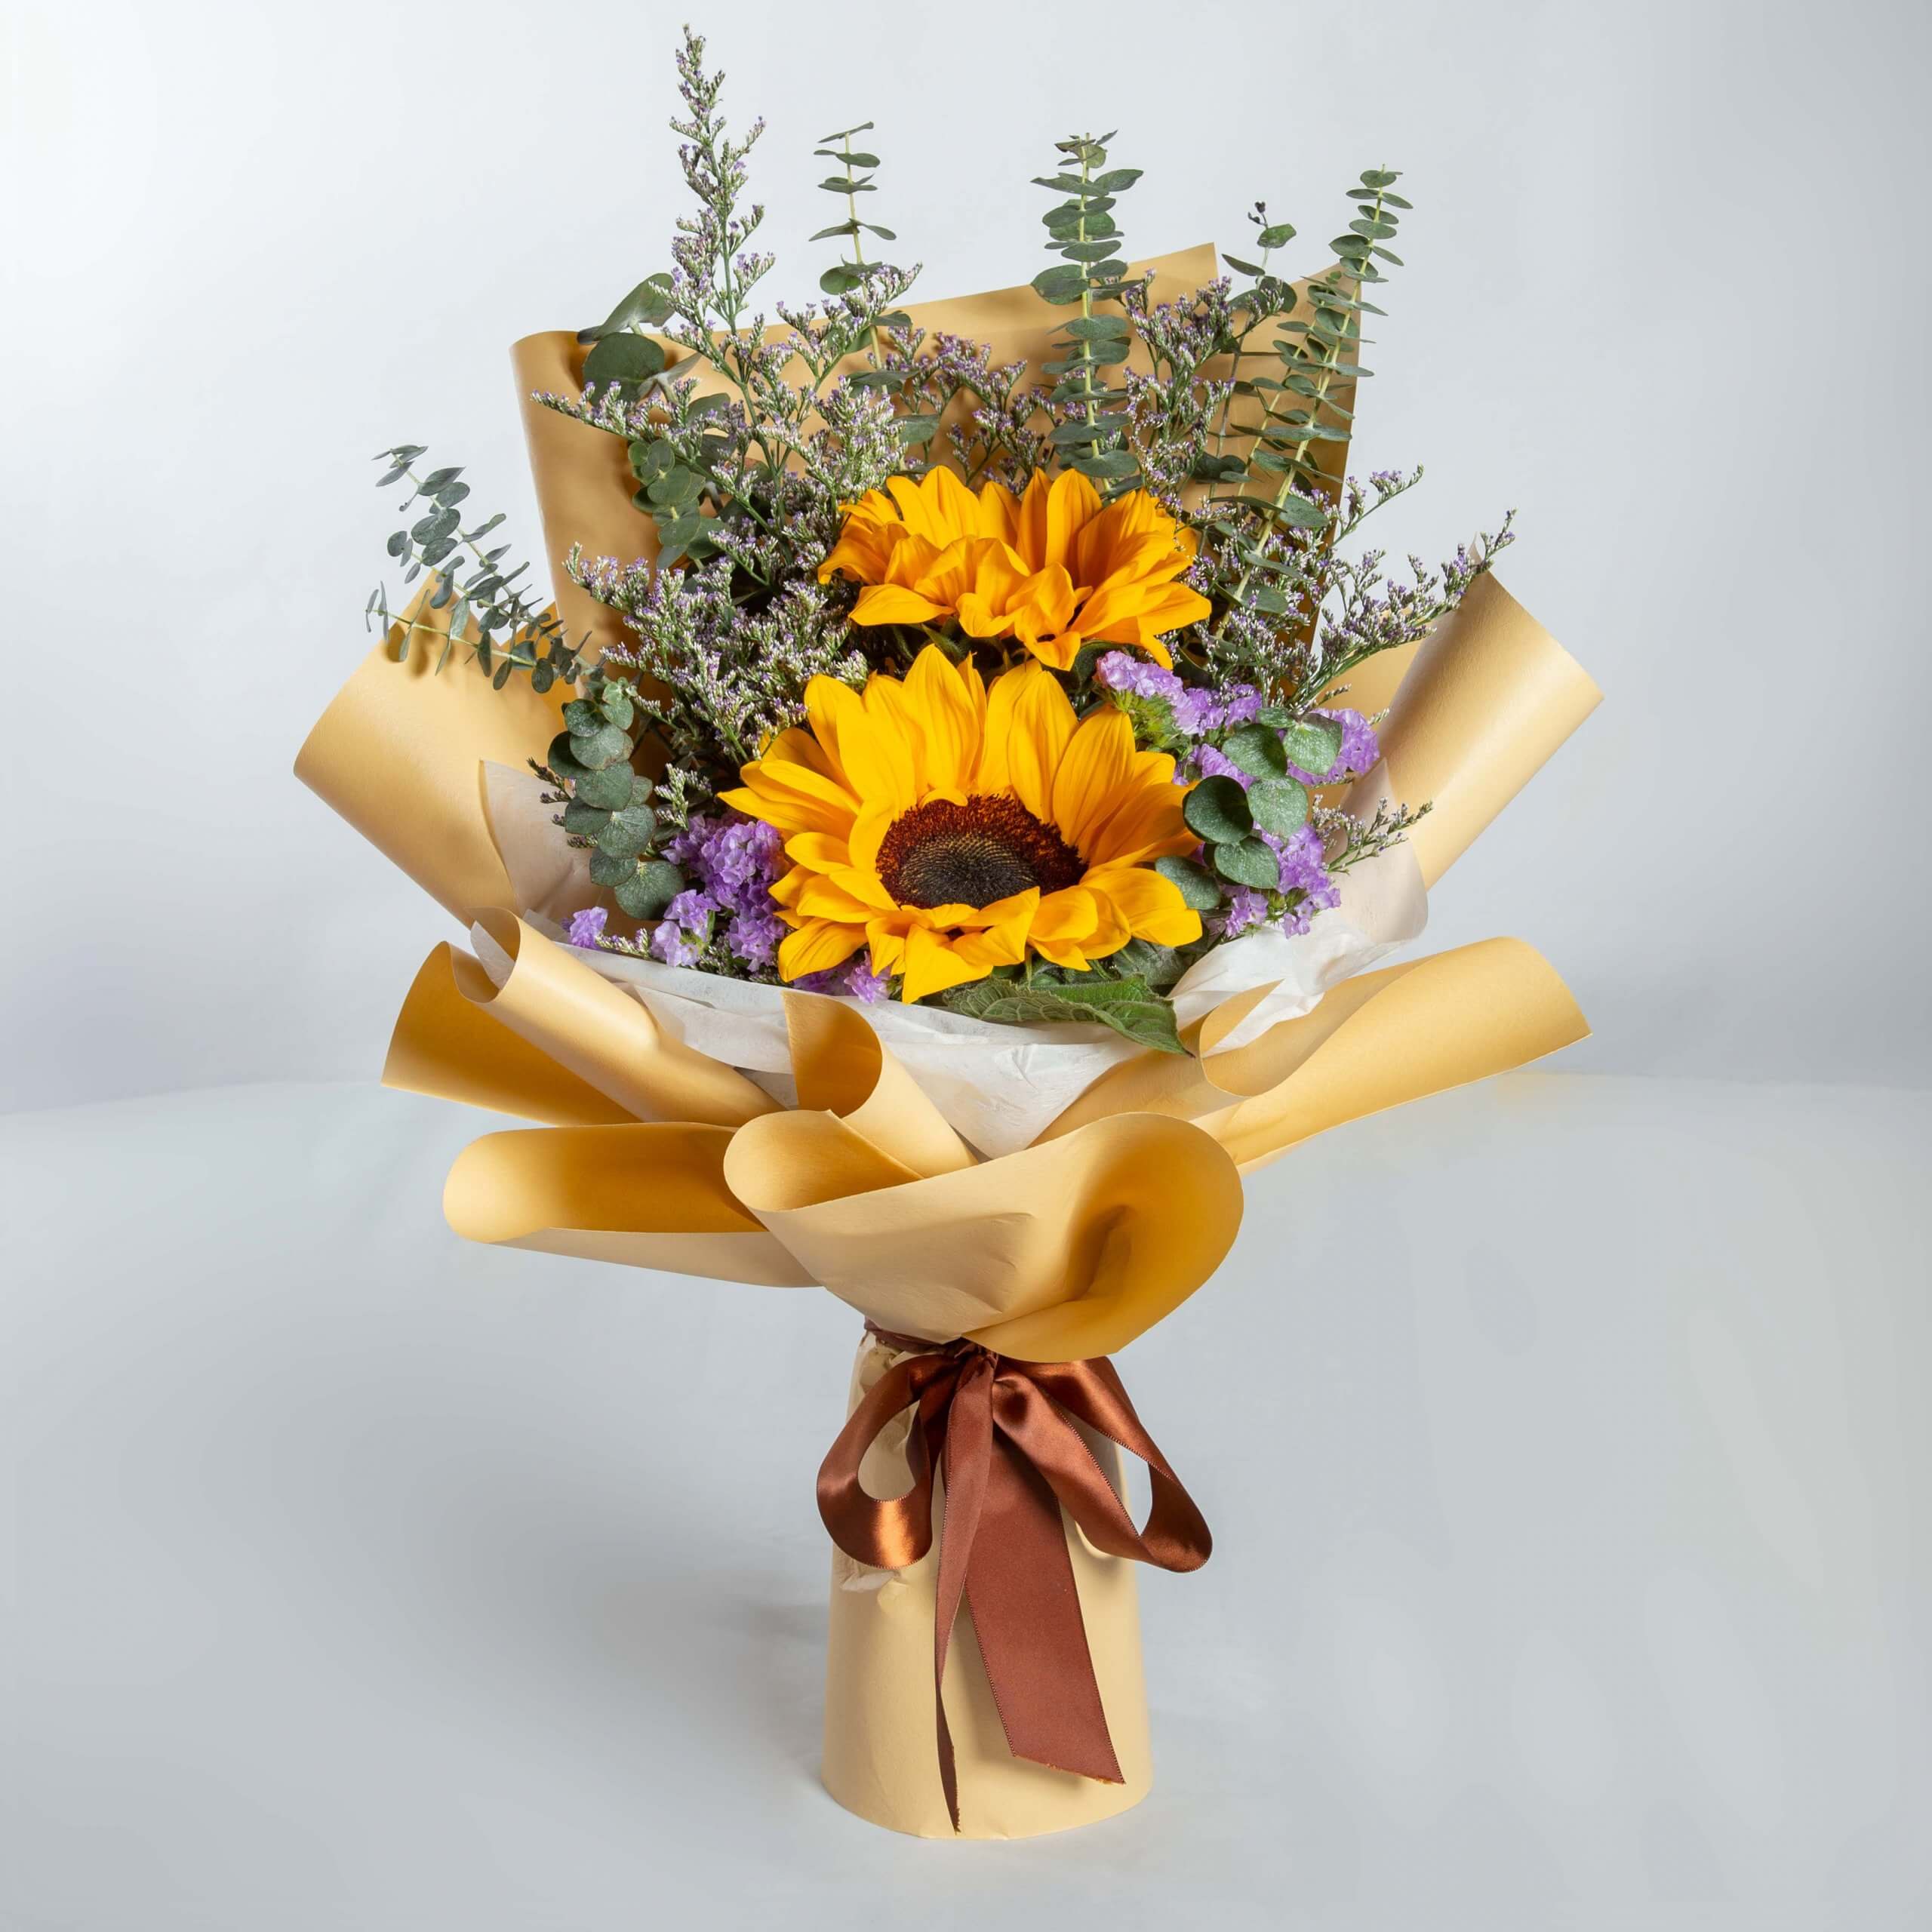 Celebrate with Style: Happy Birthday Flowers that Make Memories